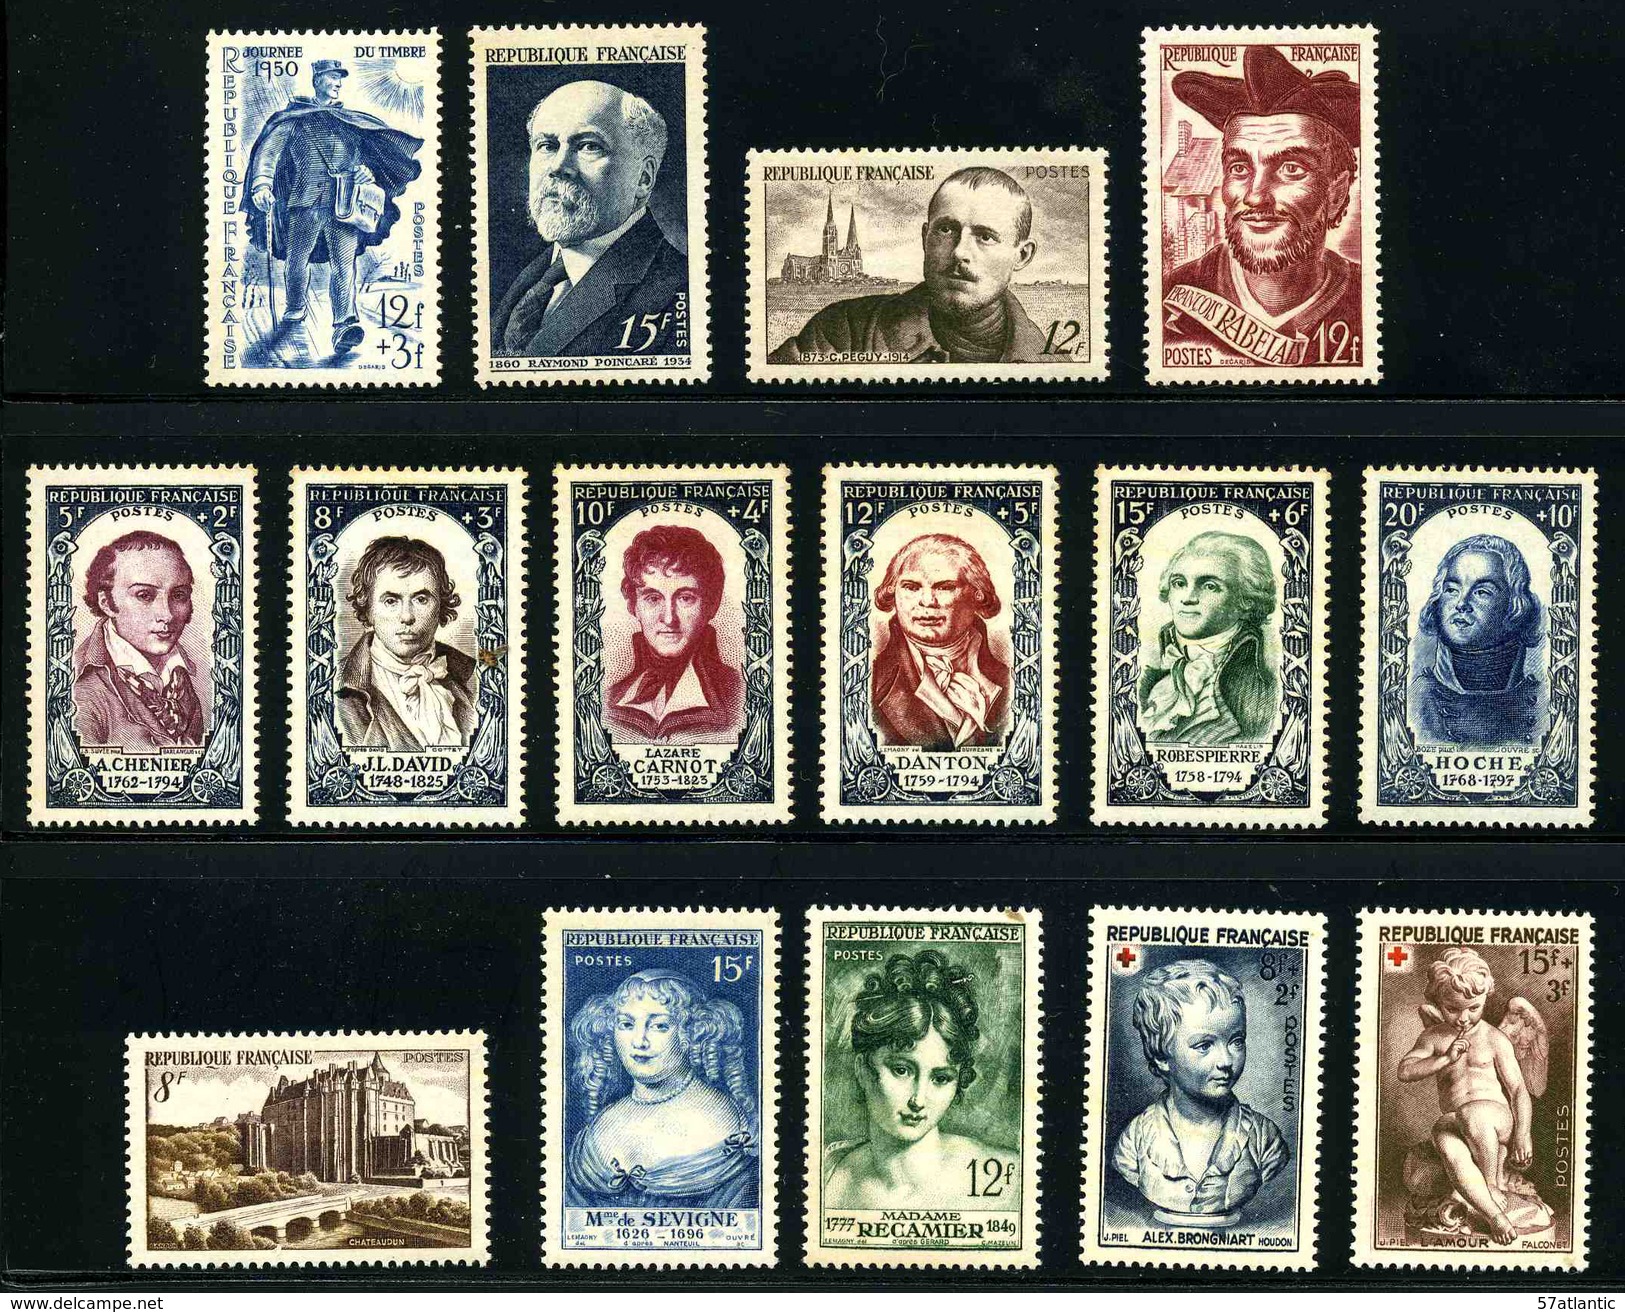 FRANCE - ANNEE COMPLETE 1950 - YT 853 à 877 ** - 15 TIMBRES NEUFS ** - 1950-1959